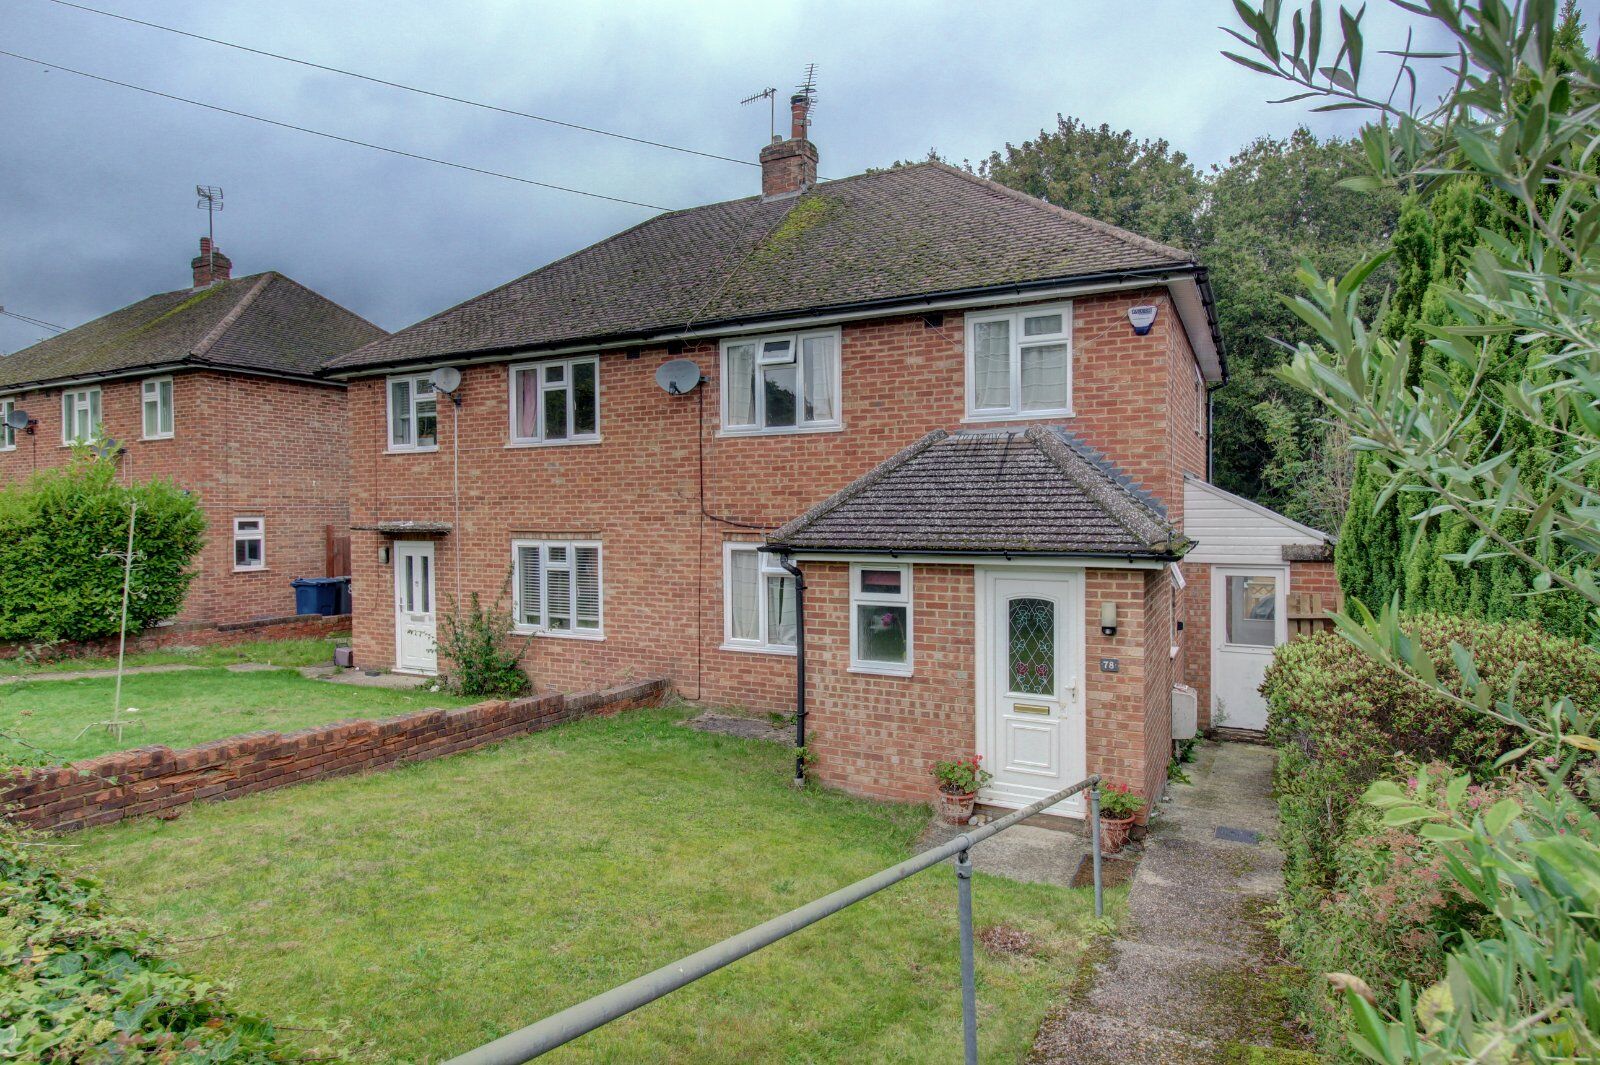 3 bedroom semi detached house for sale Tyzack Road, High Wycombe, HP13, main image